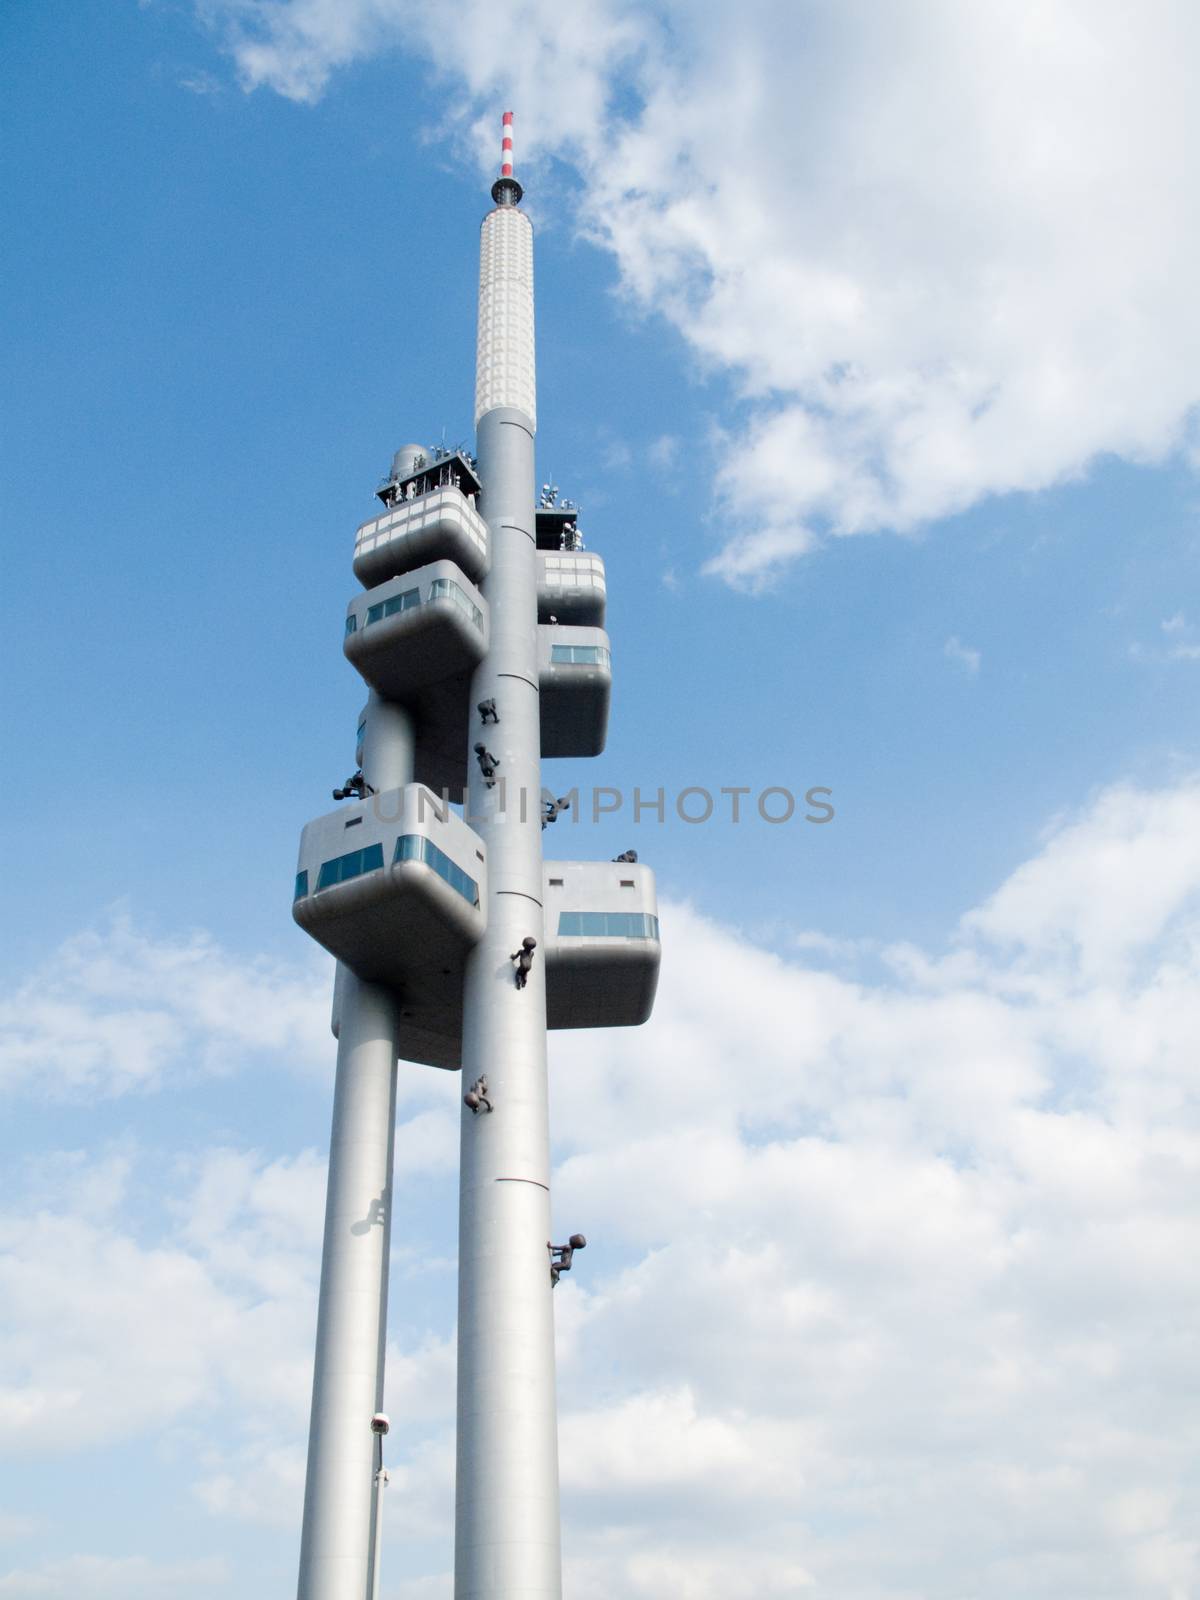 Zizkov TV Tower with sculptures of crawling babies by Digifoodstock